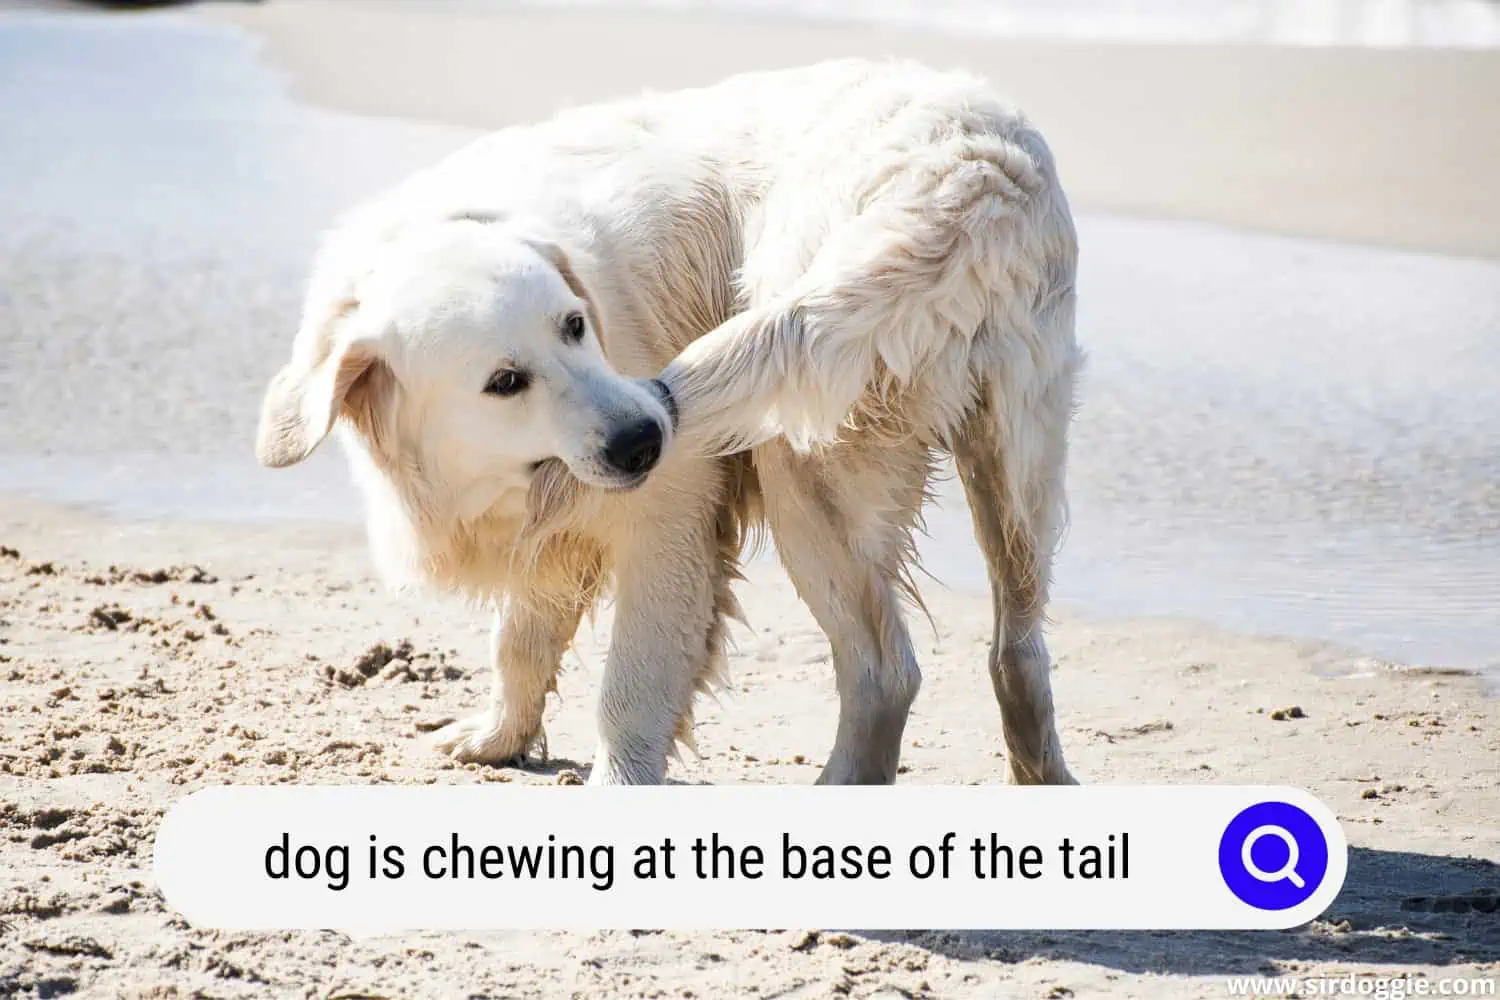 dog is chewing at the base of the tail